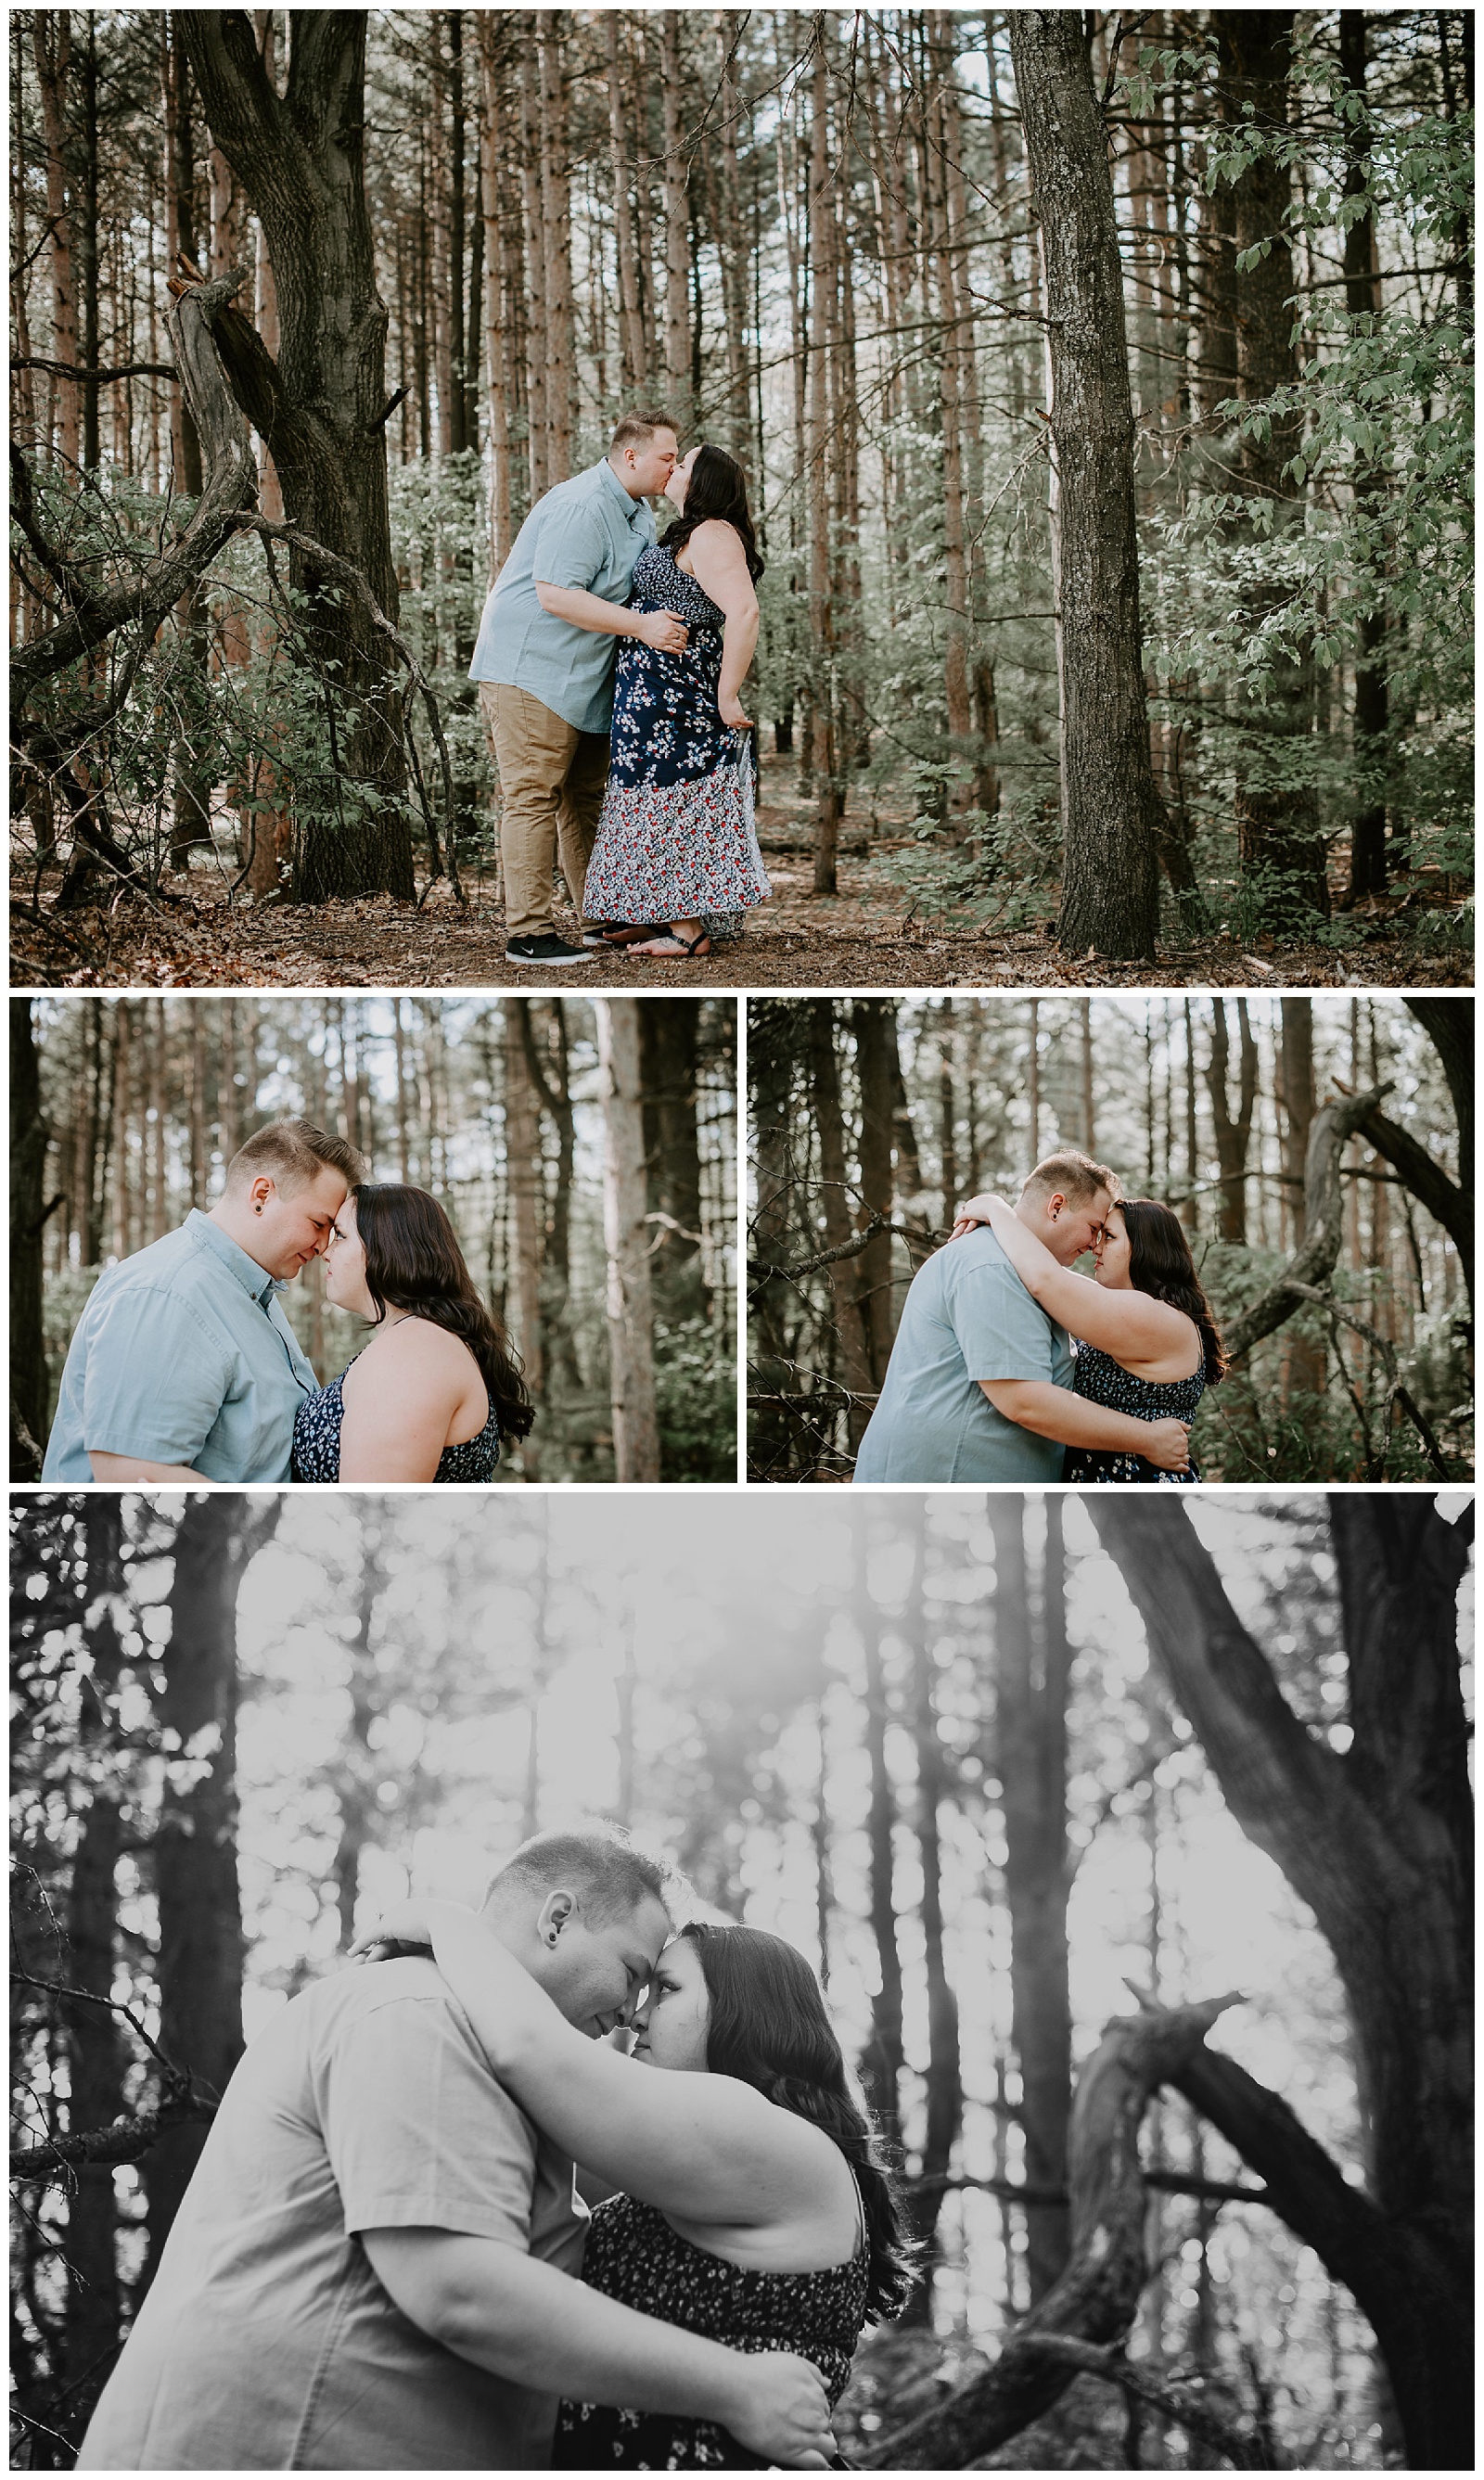 Grand Rapids Engagement Photographer Liv Lyszyk Photography at Provin Trails in Grand Rapids, Michigan